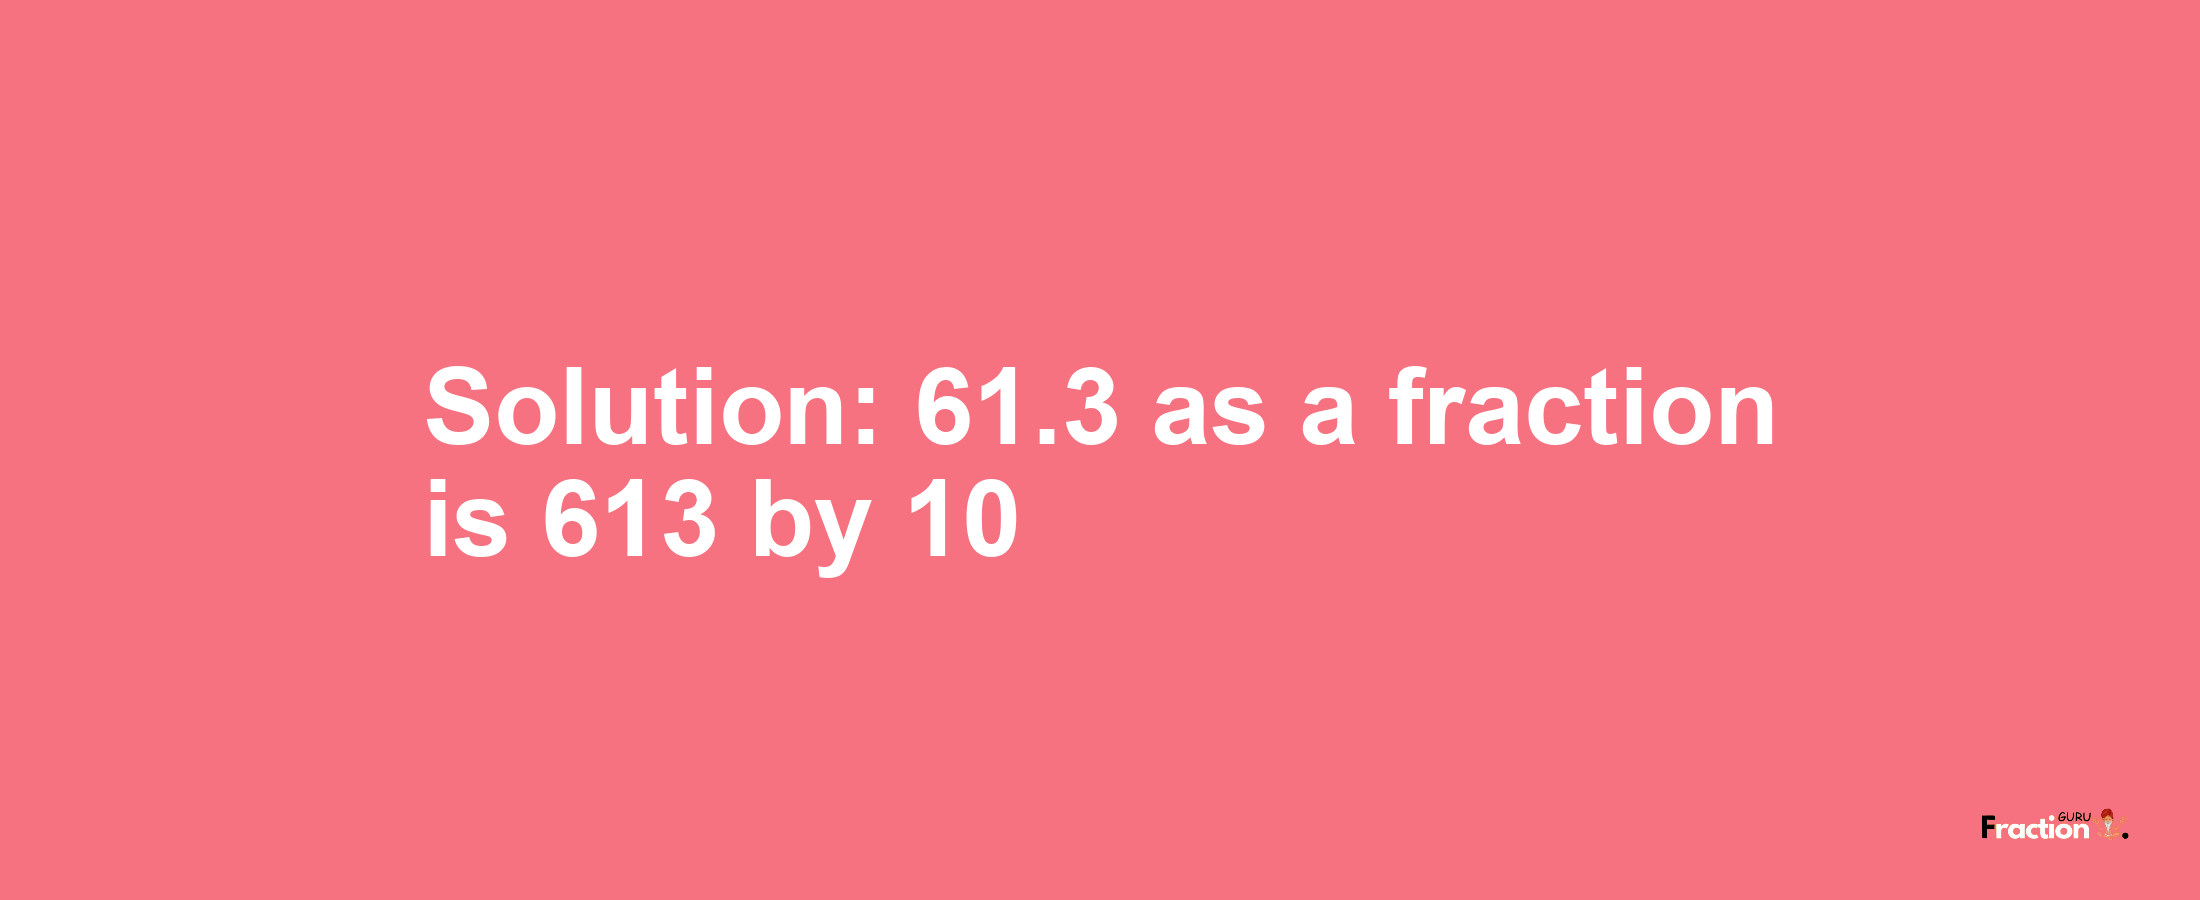 Solution:61.3 as a fraction is 613/10